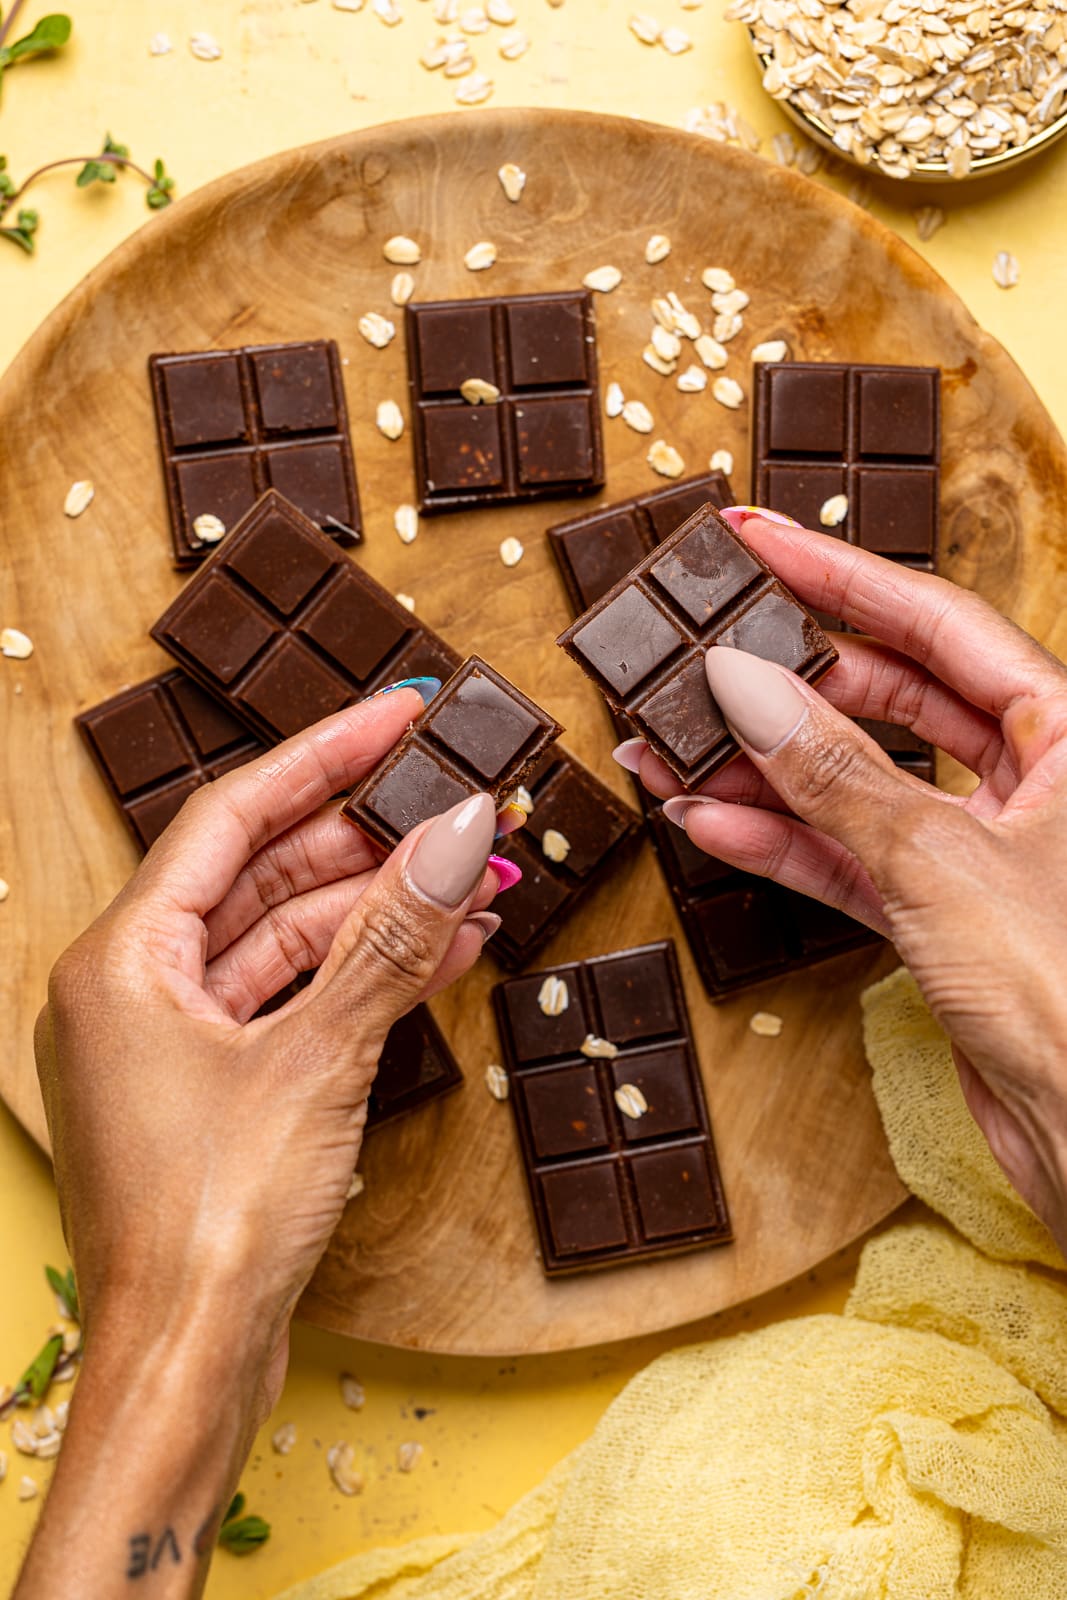 Hands breaking chocolate bars with a brown wood plate in the background.